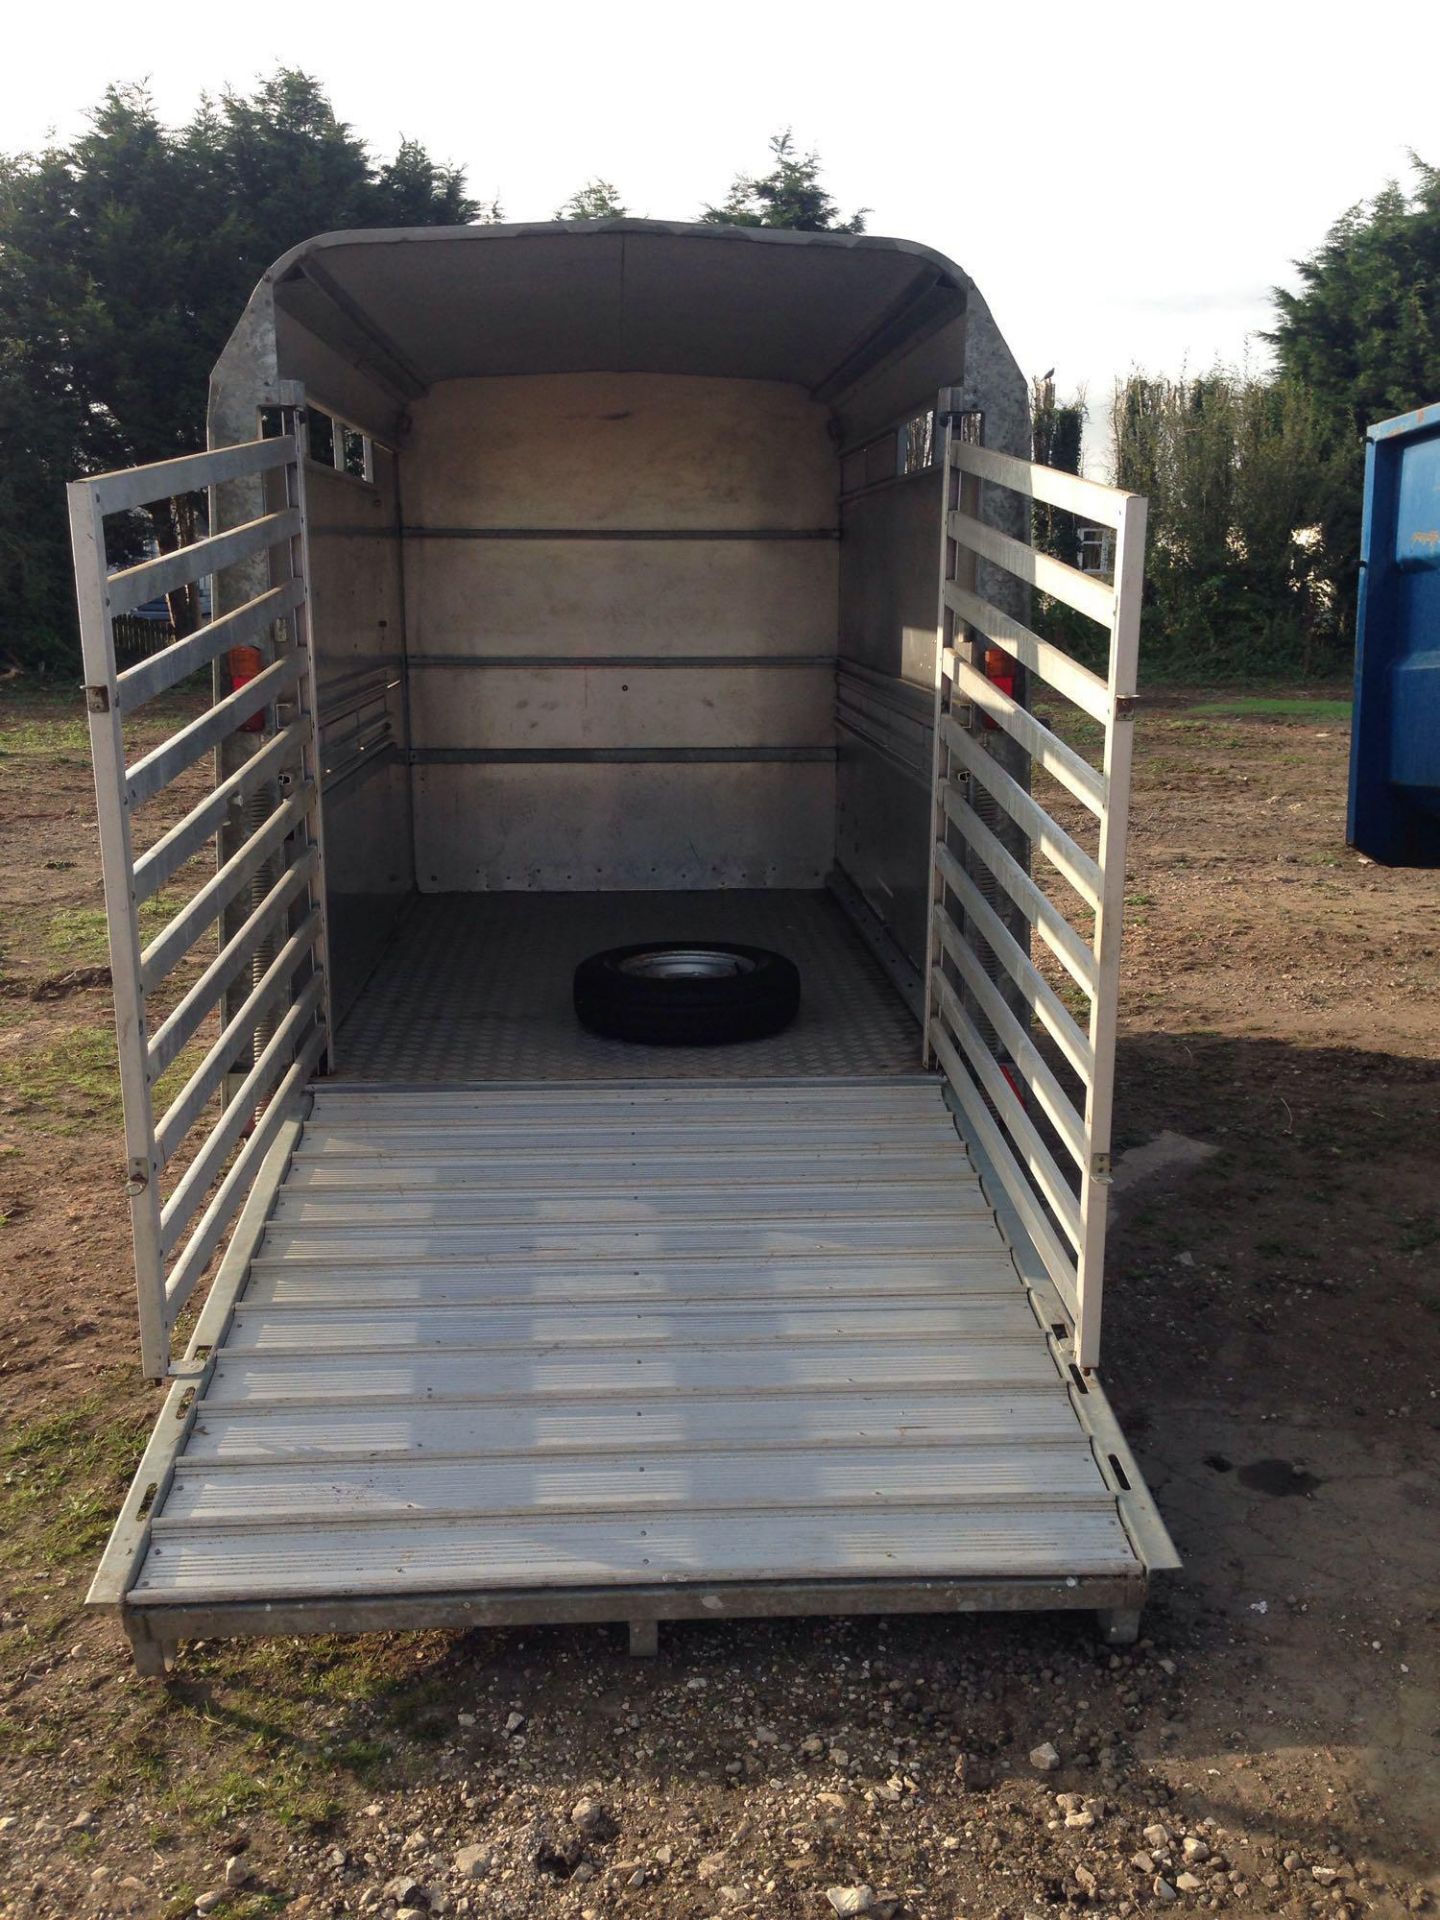 Ifor Williams TA5G-8 twin axle livestock trailer, sprung tailgate. Complete with spare wheel. - Image 3 of 4